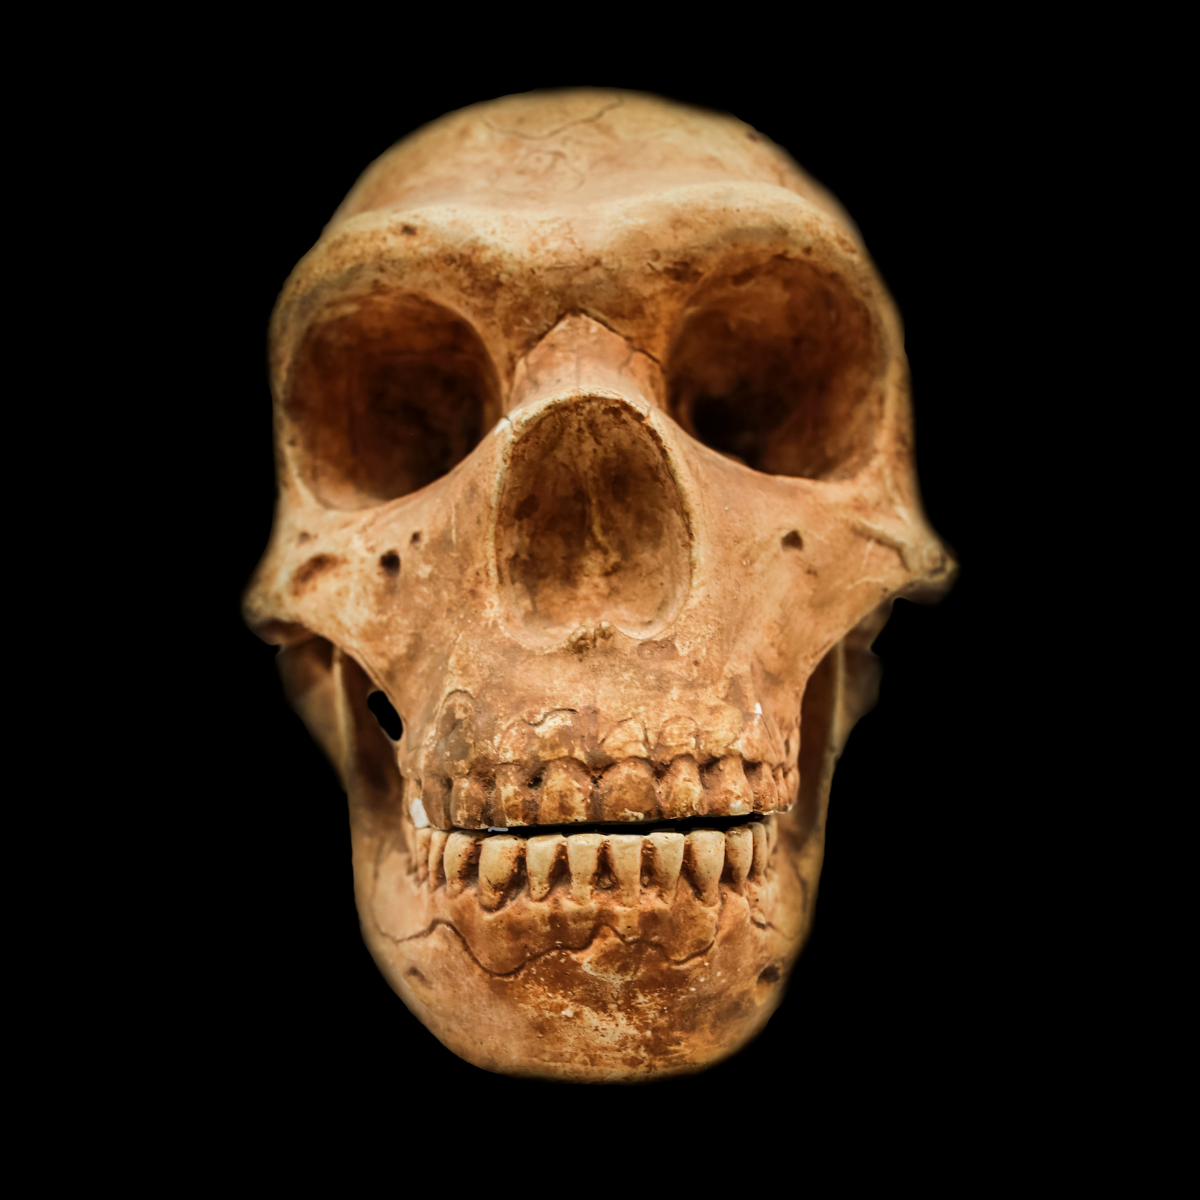 S5.21 Past to present: Searching for evolutionary stories in ancient DNA